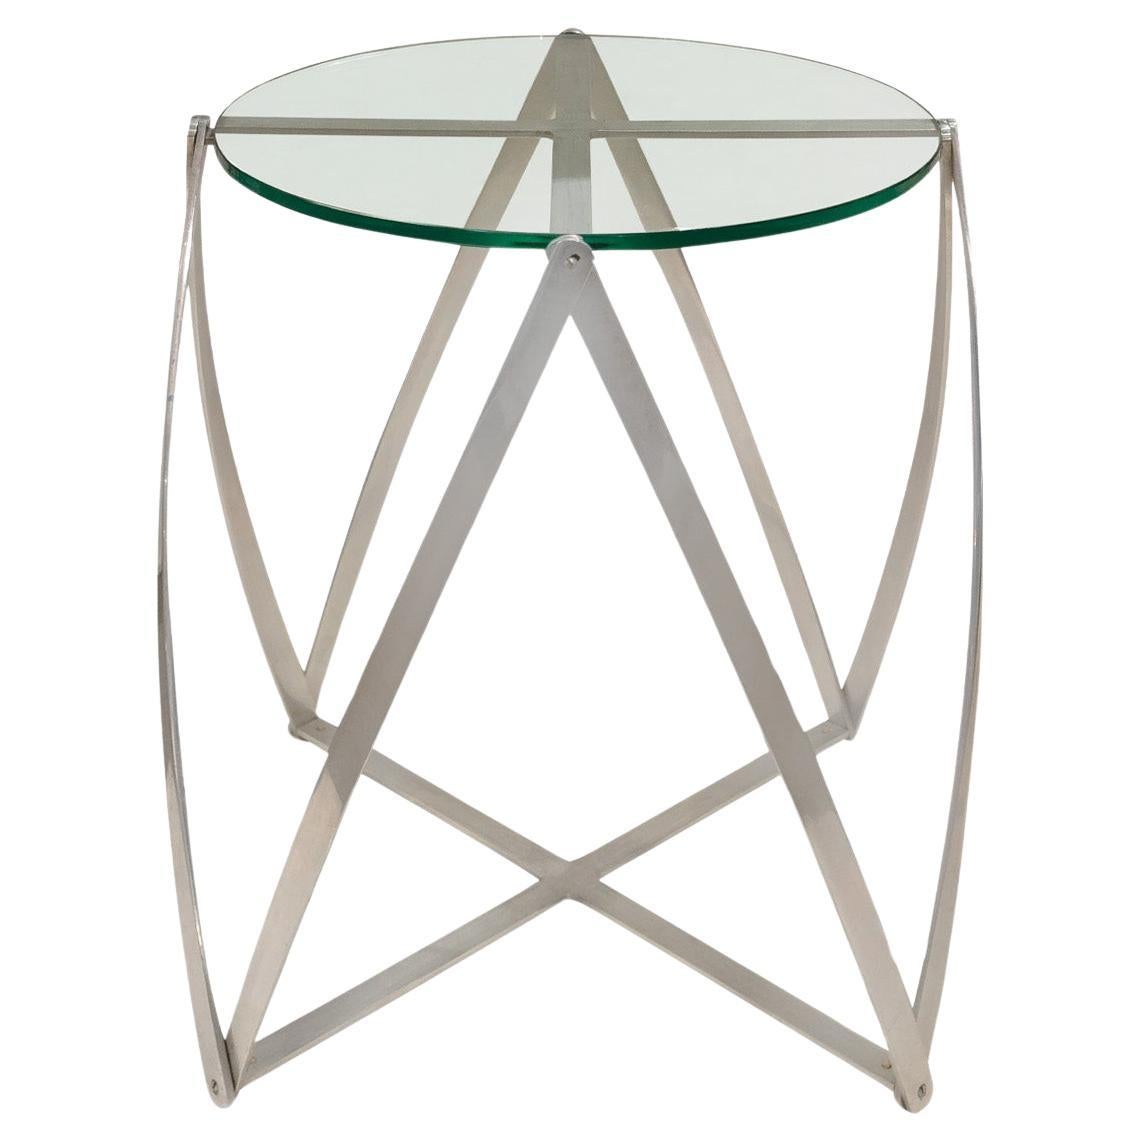 John Vesey Sculptural Aluminum and Glass End Table 1970s For Sale